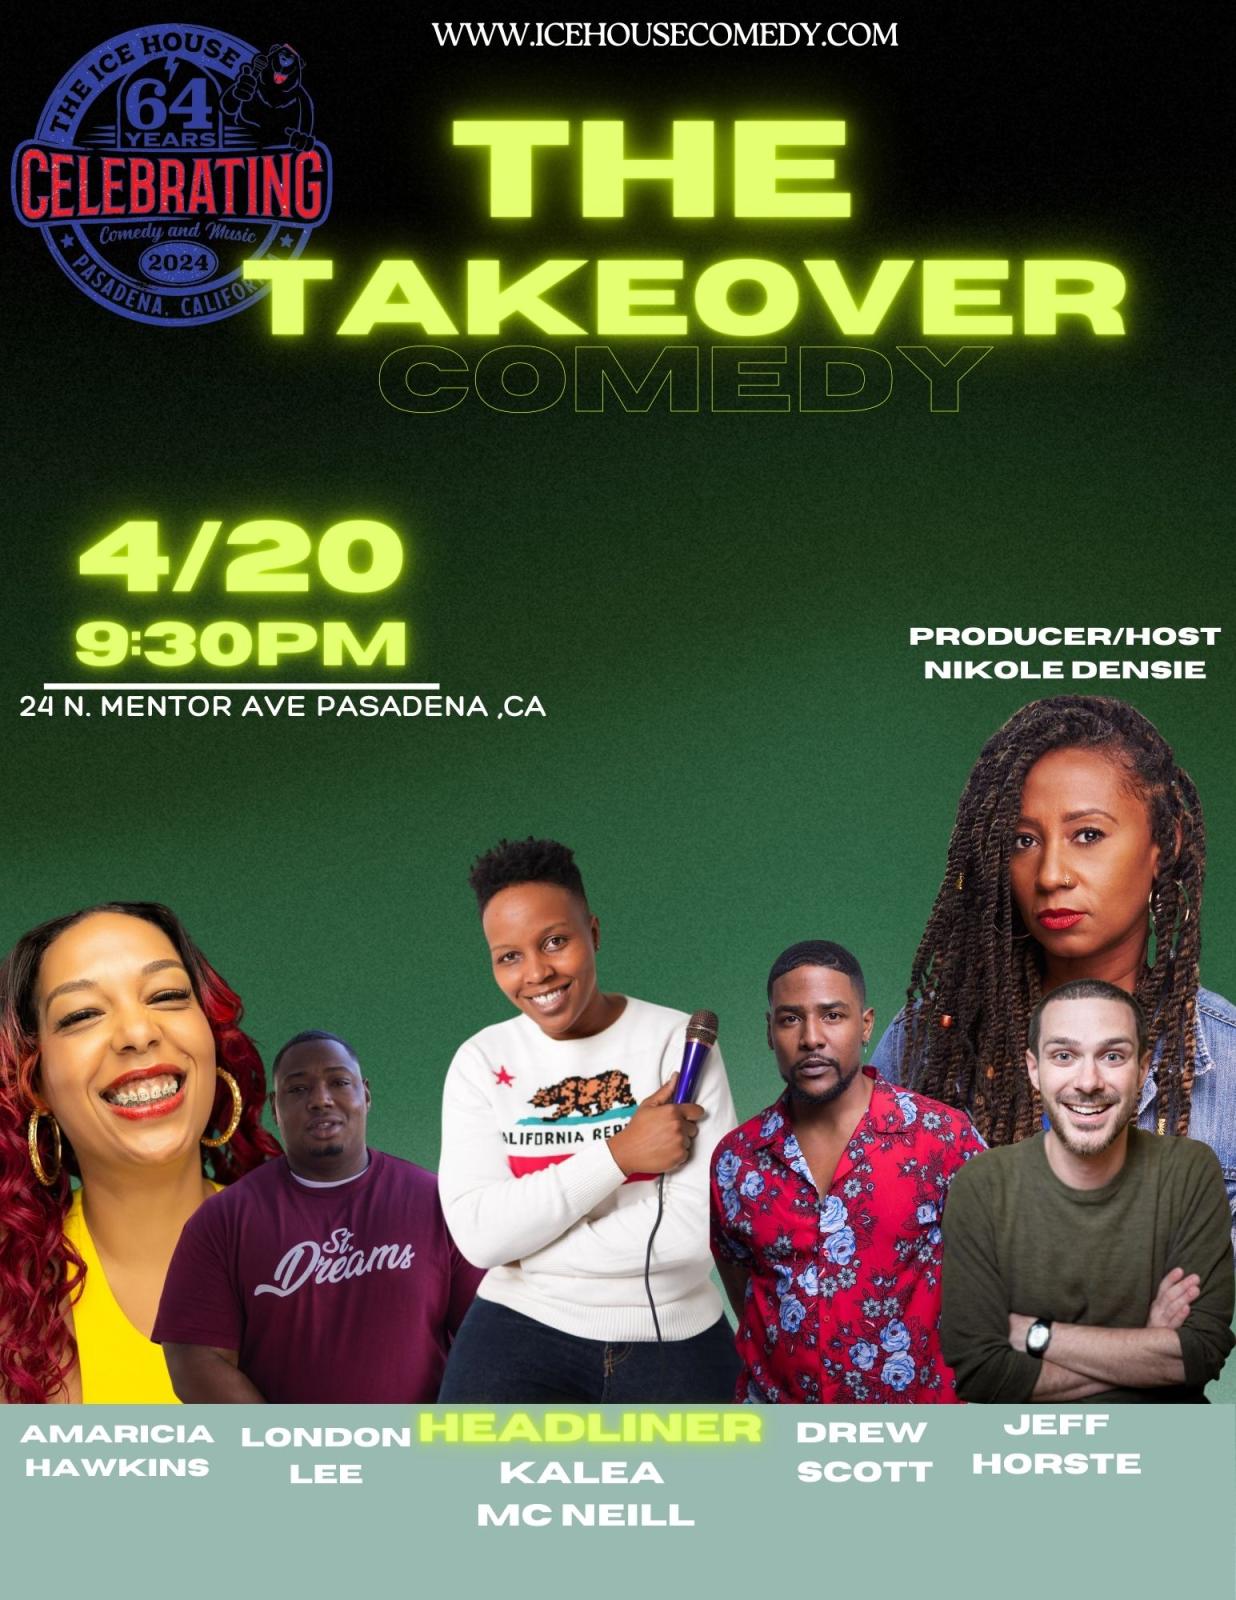 The Takeover Comedy